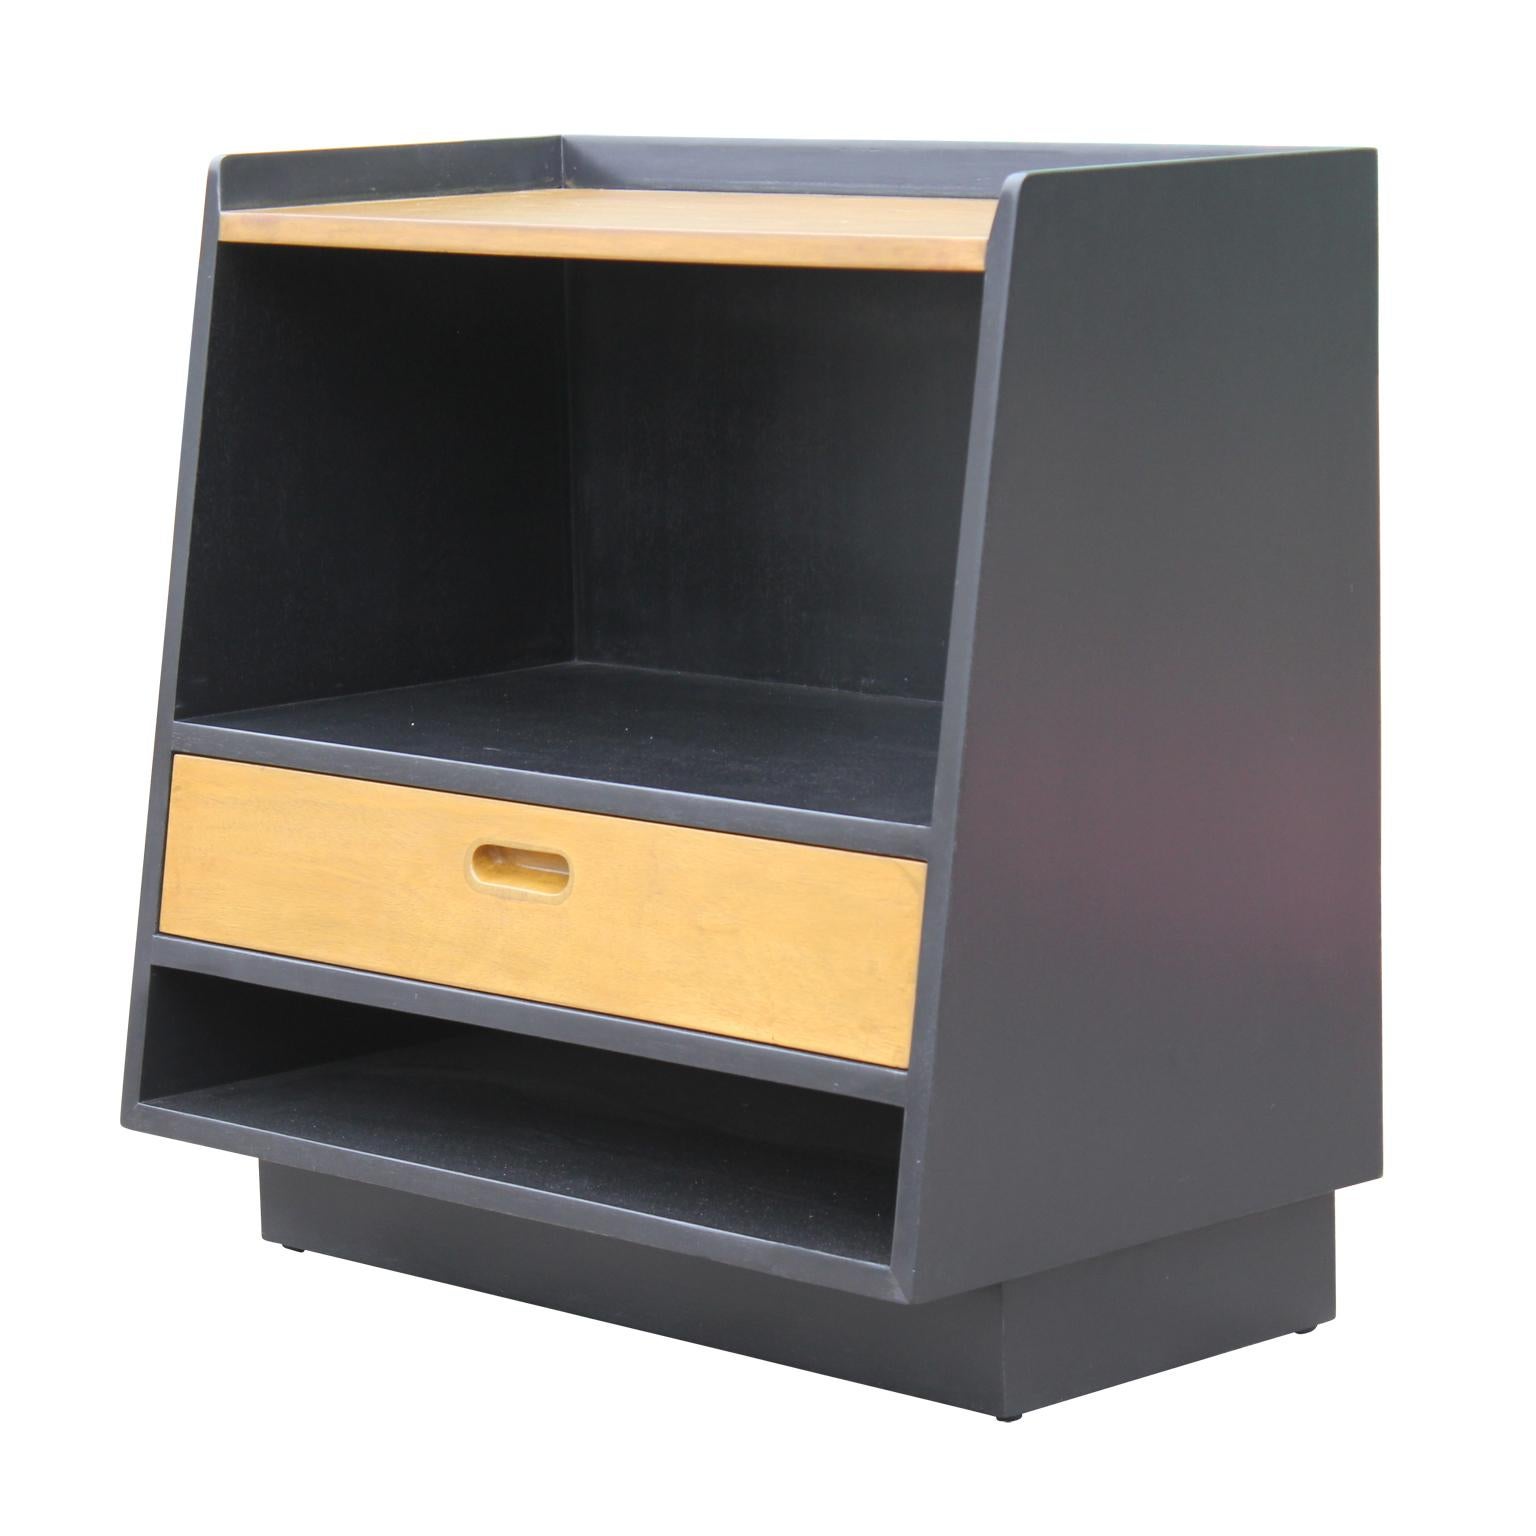 American Pair of Two-Toned Modern Angular Nightstands by Edward Wormley for Dunbar